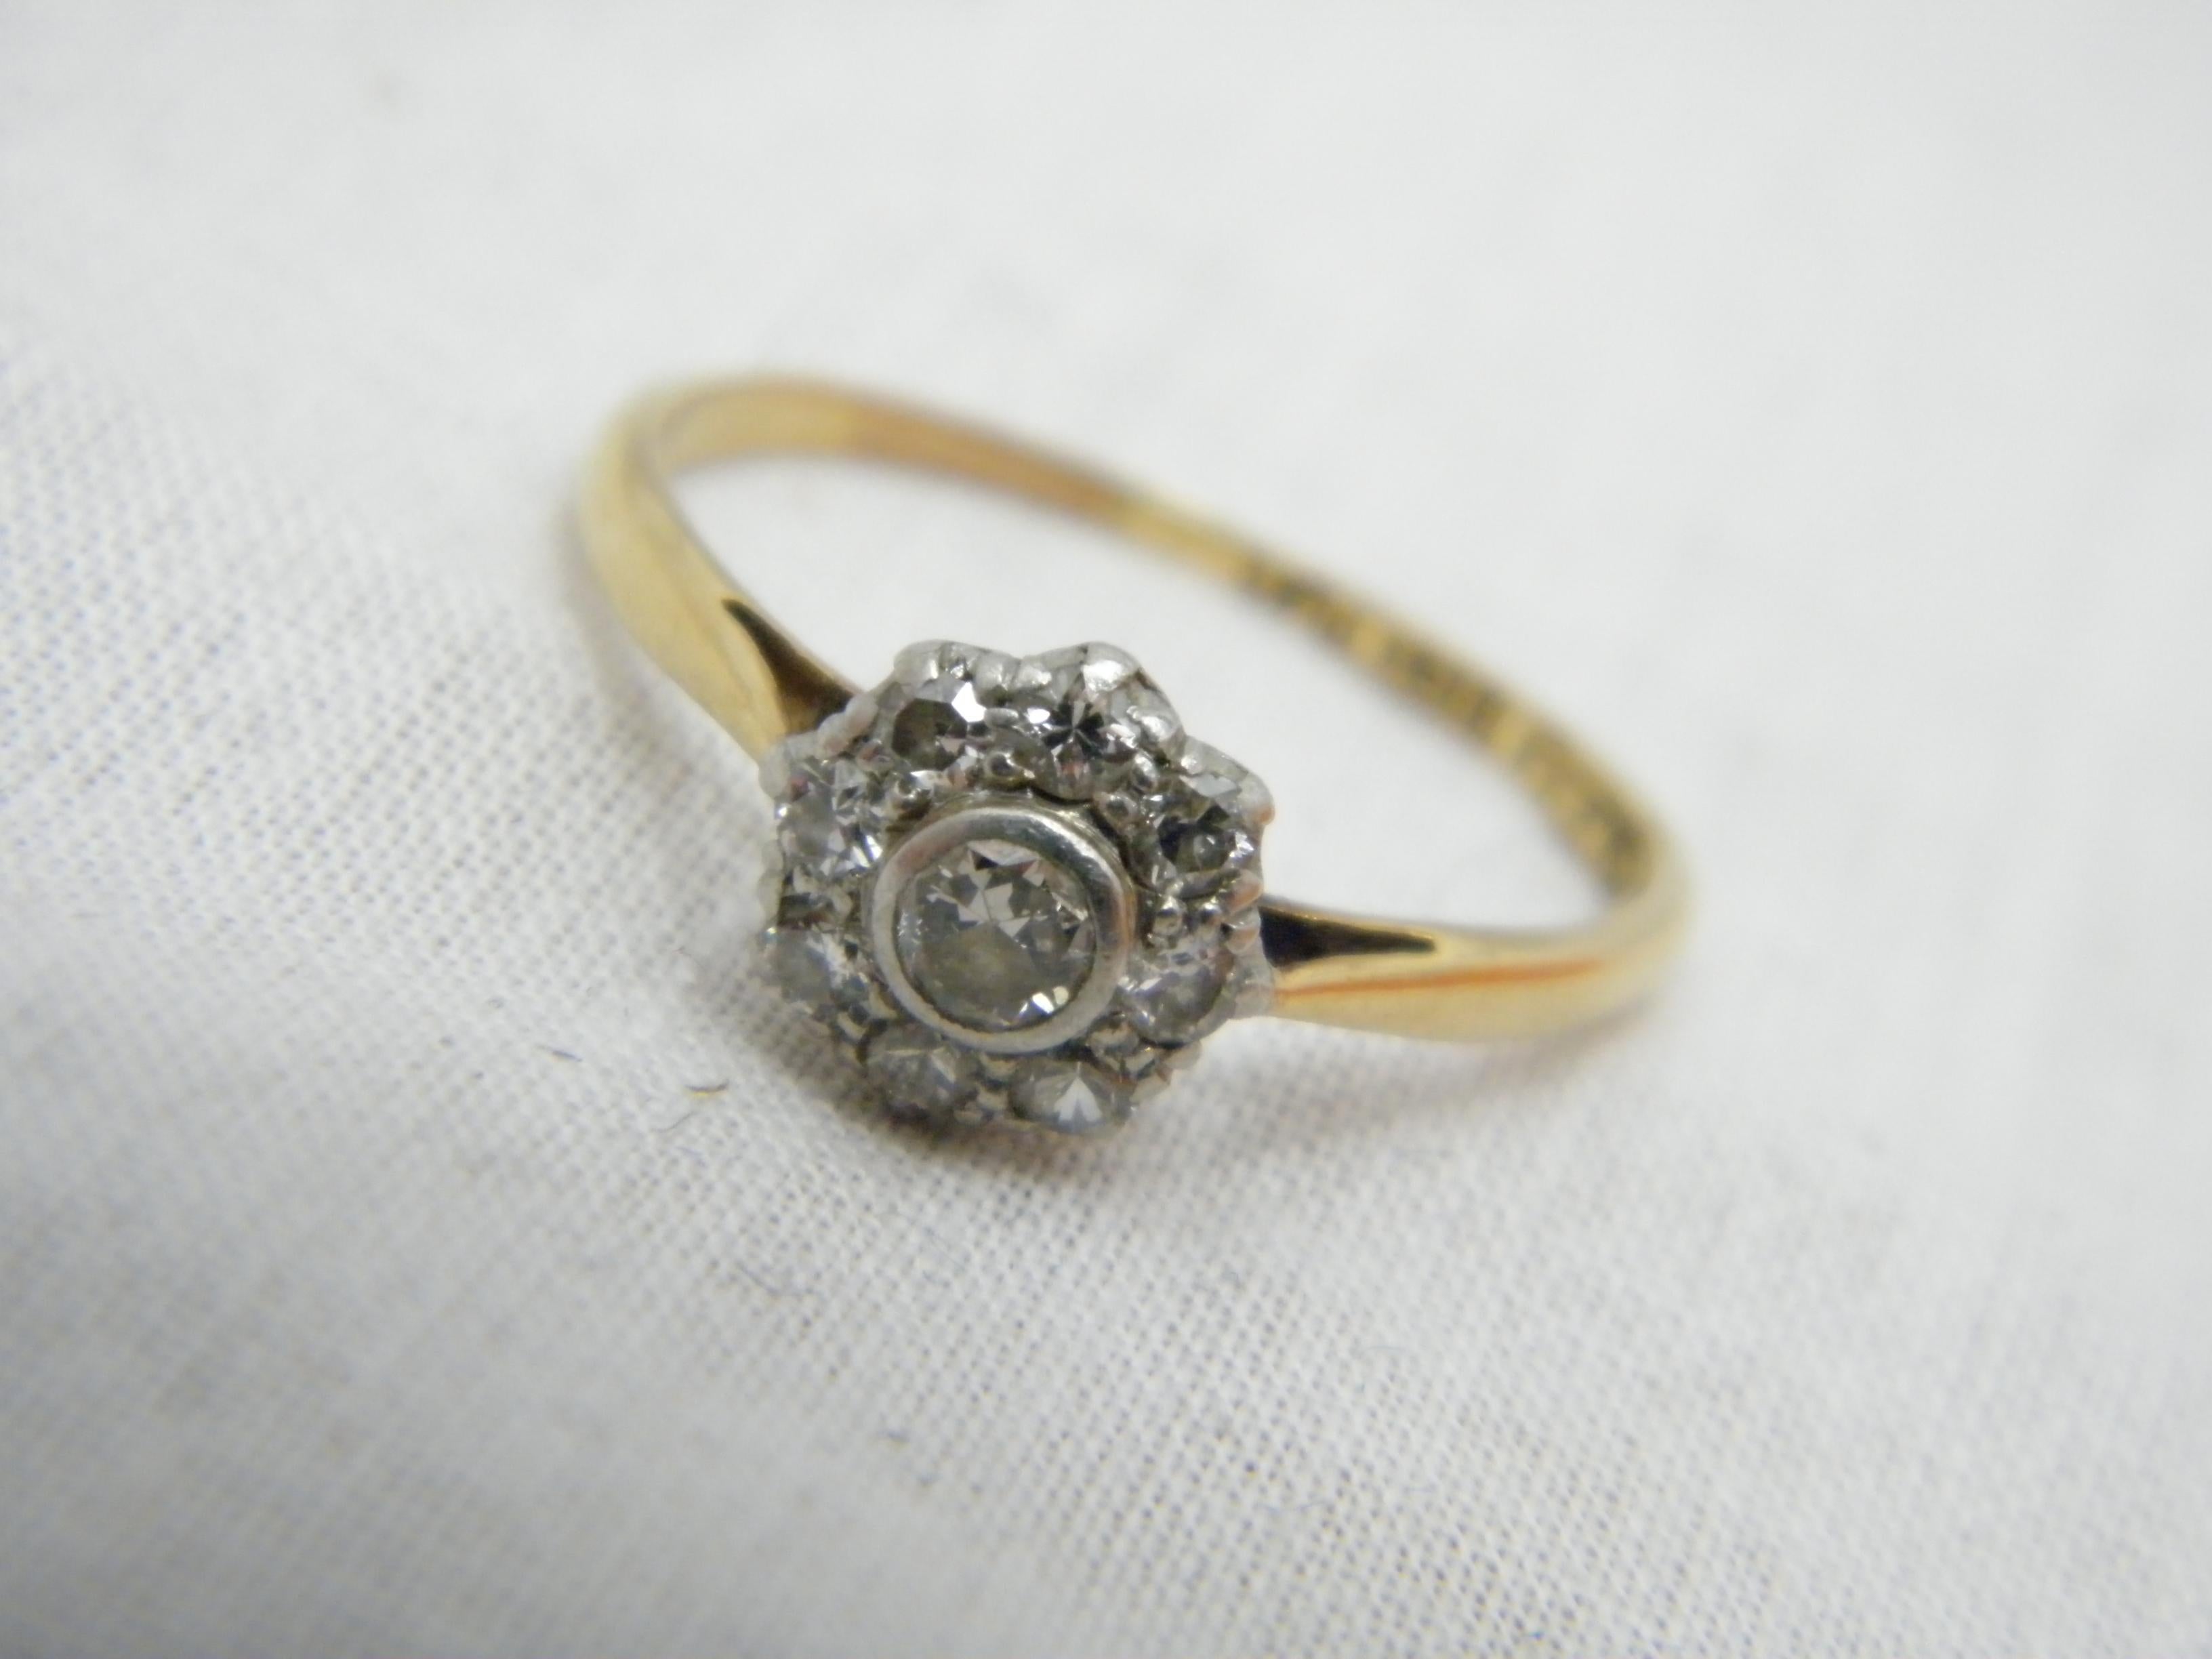 If you have landed on this page then you have an eye for beauty.

On offer is this gorgeous
ANTIQUE 18CT GOLD PLATINUM DIAMOND DAISY CLUSTER RING

DETAILS
Material: 18ct 750/000 Heavy Yellow Gold with 950 Platinum Pt Mount
This ring has a sturdy